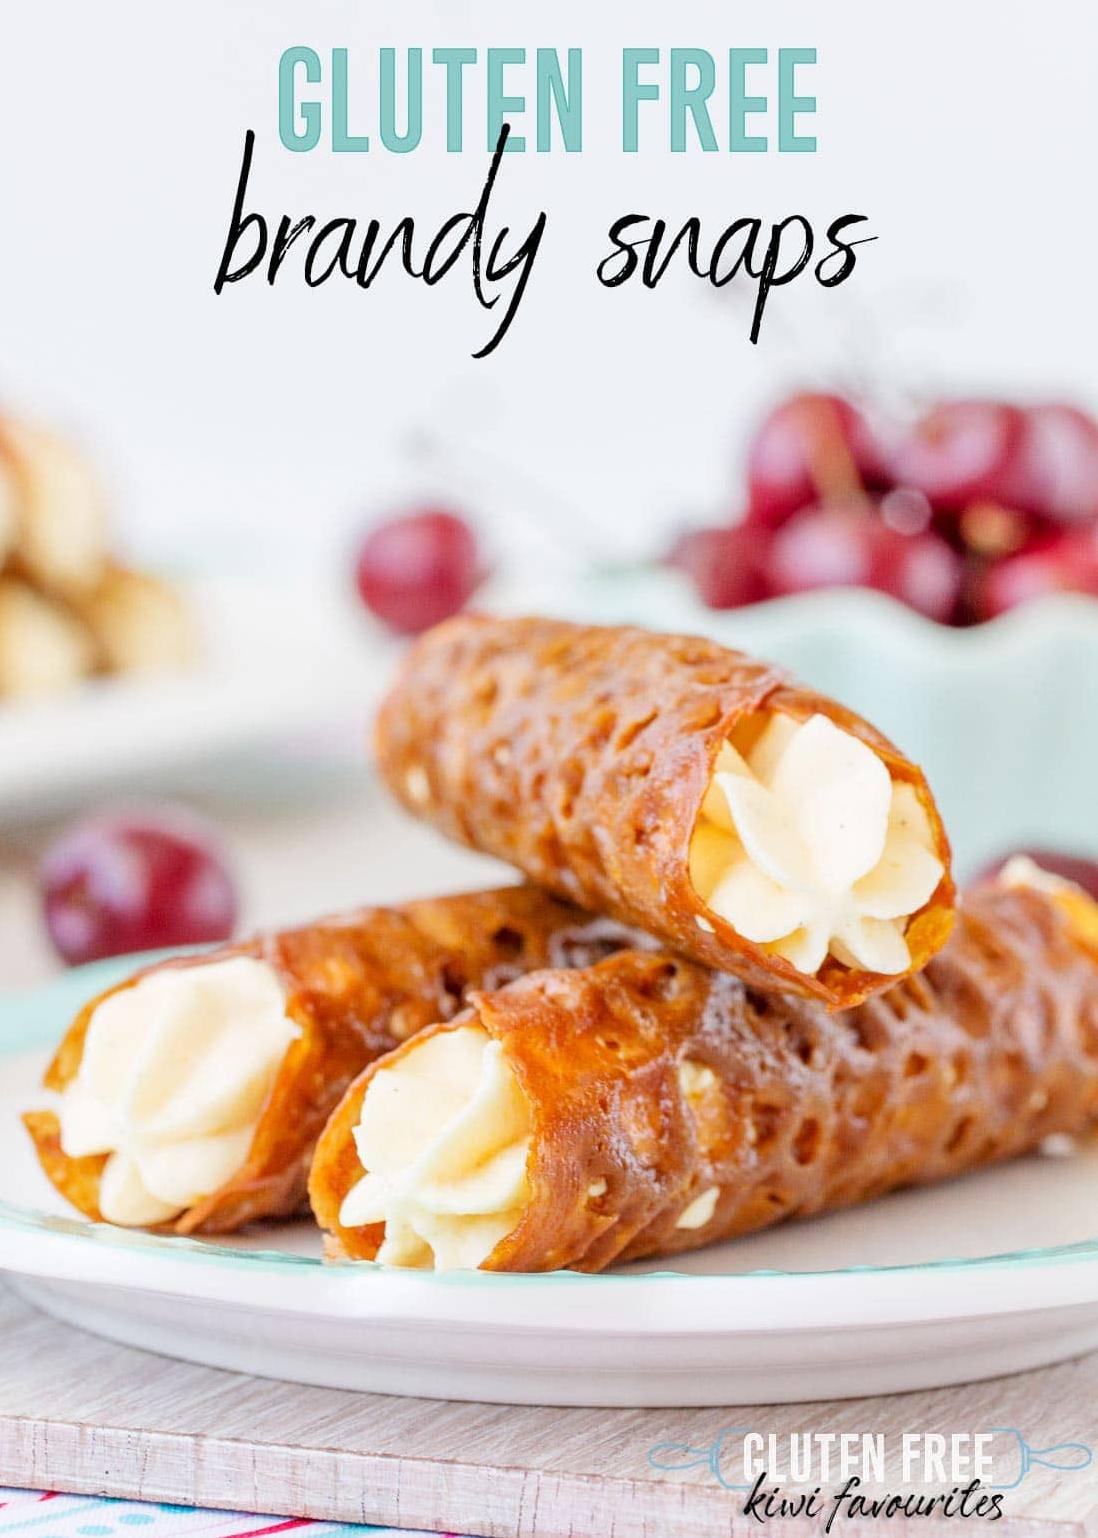  These brandy snaps are the perfect treat for a cozy Christmas night in.